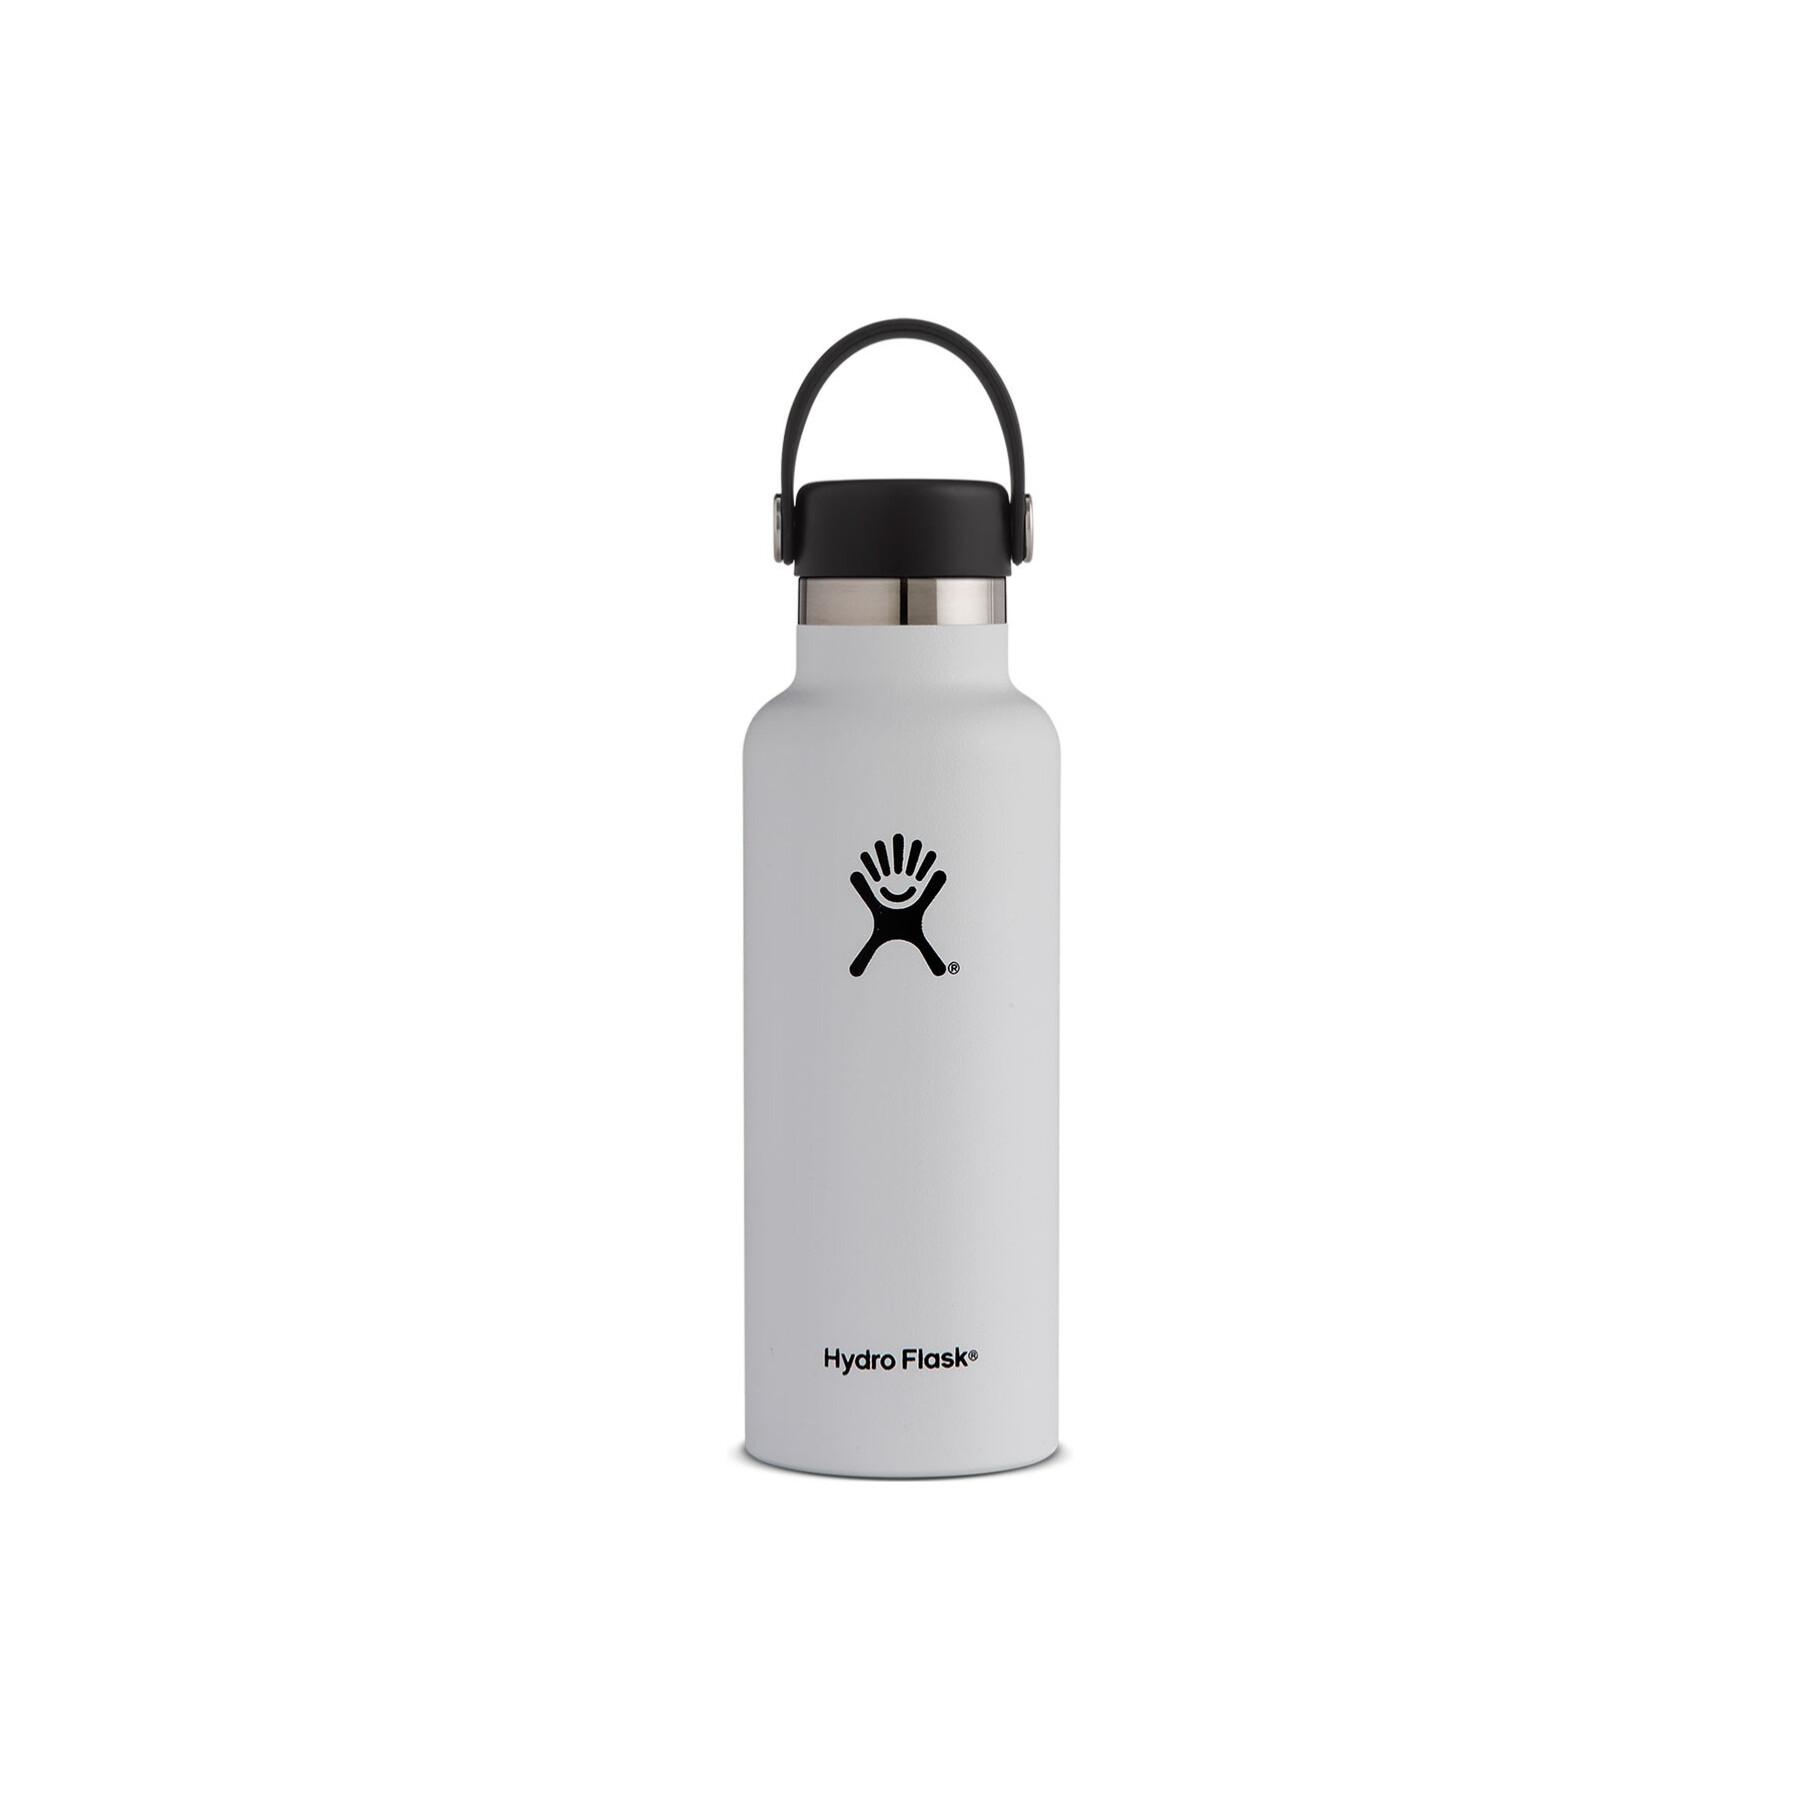 Standaard thermosfles Hydro Flask with standard mouth flex cap 18 oz